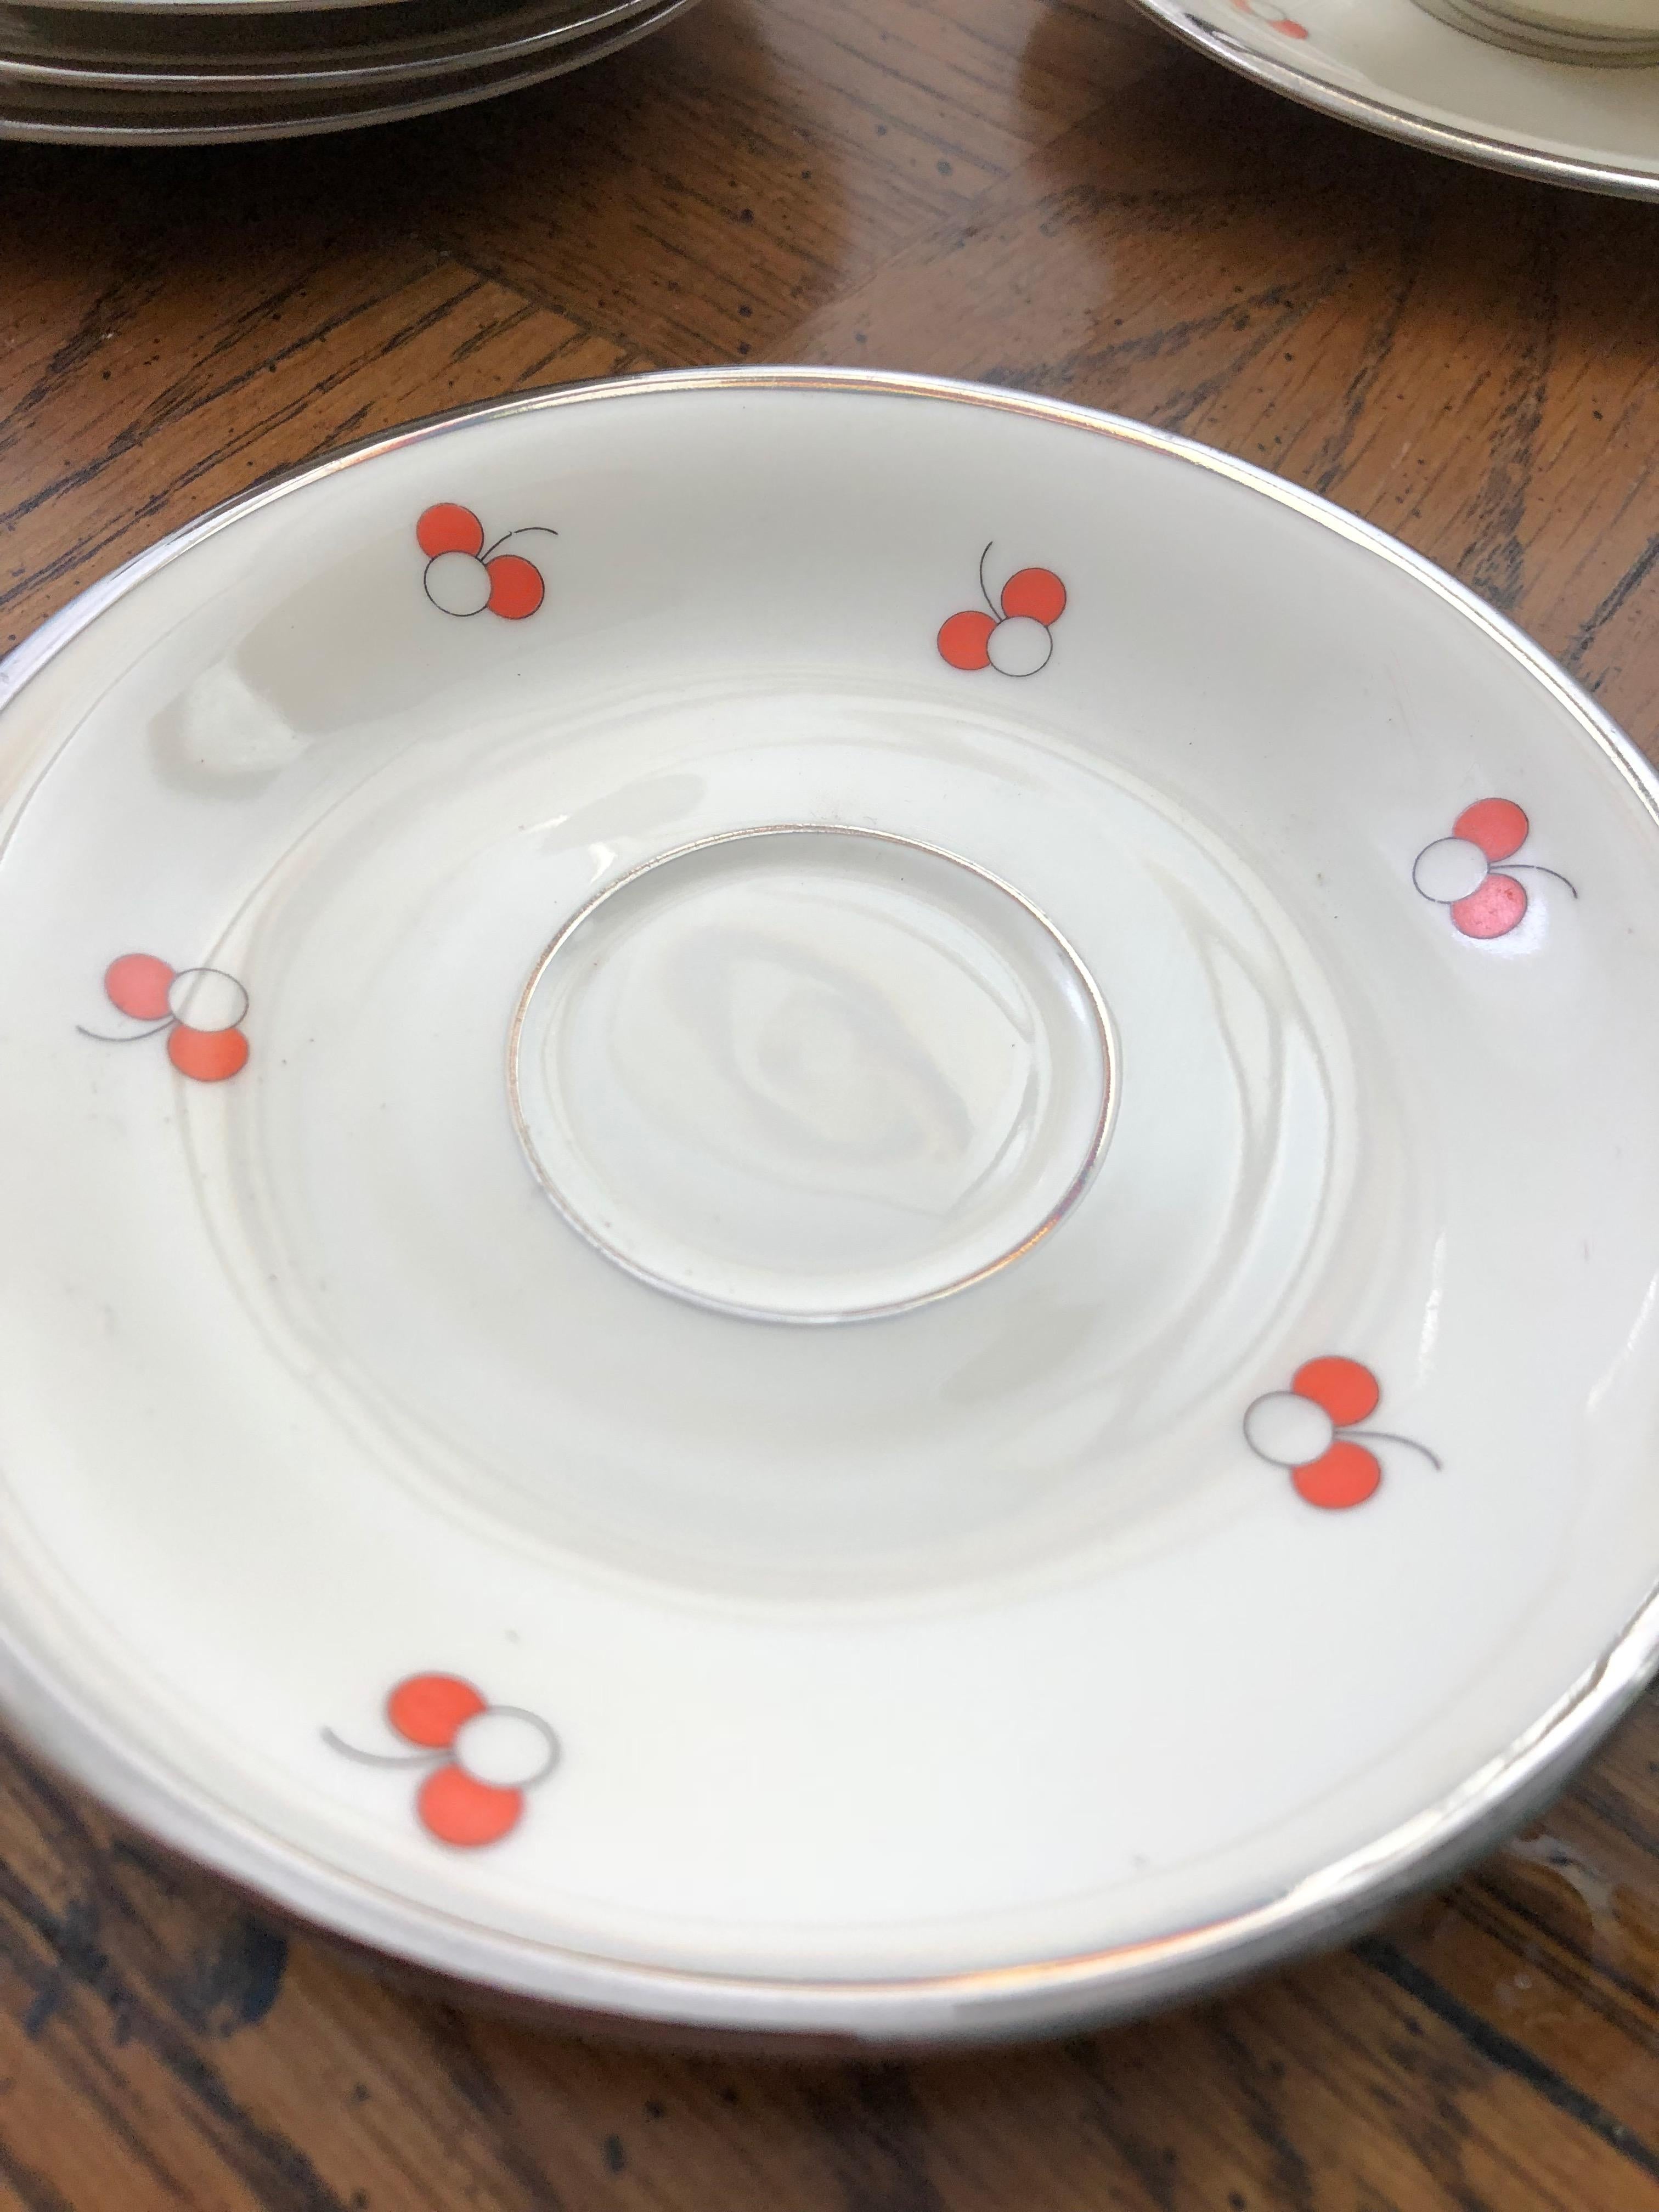 Adorable and extremely rare dematisse set in original case. White with red and white cherry triplets with chic charcoal grey rim. All pieces marked. Mark corresponds to the years 1925-1939. During this time Rosenthal was imported to the US at high